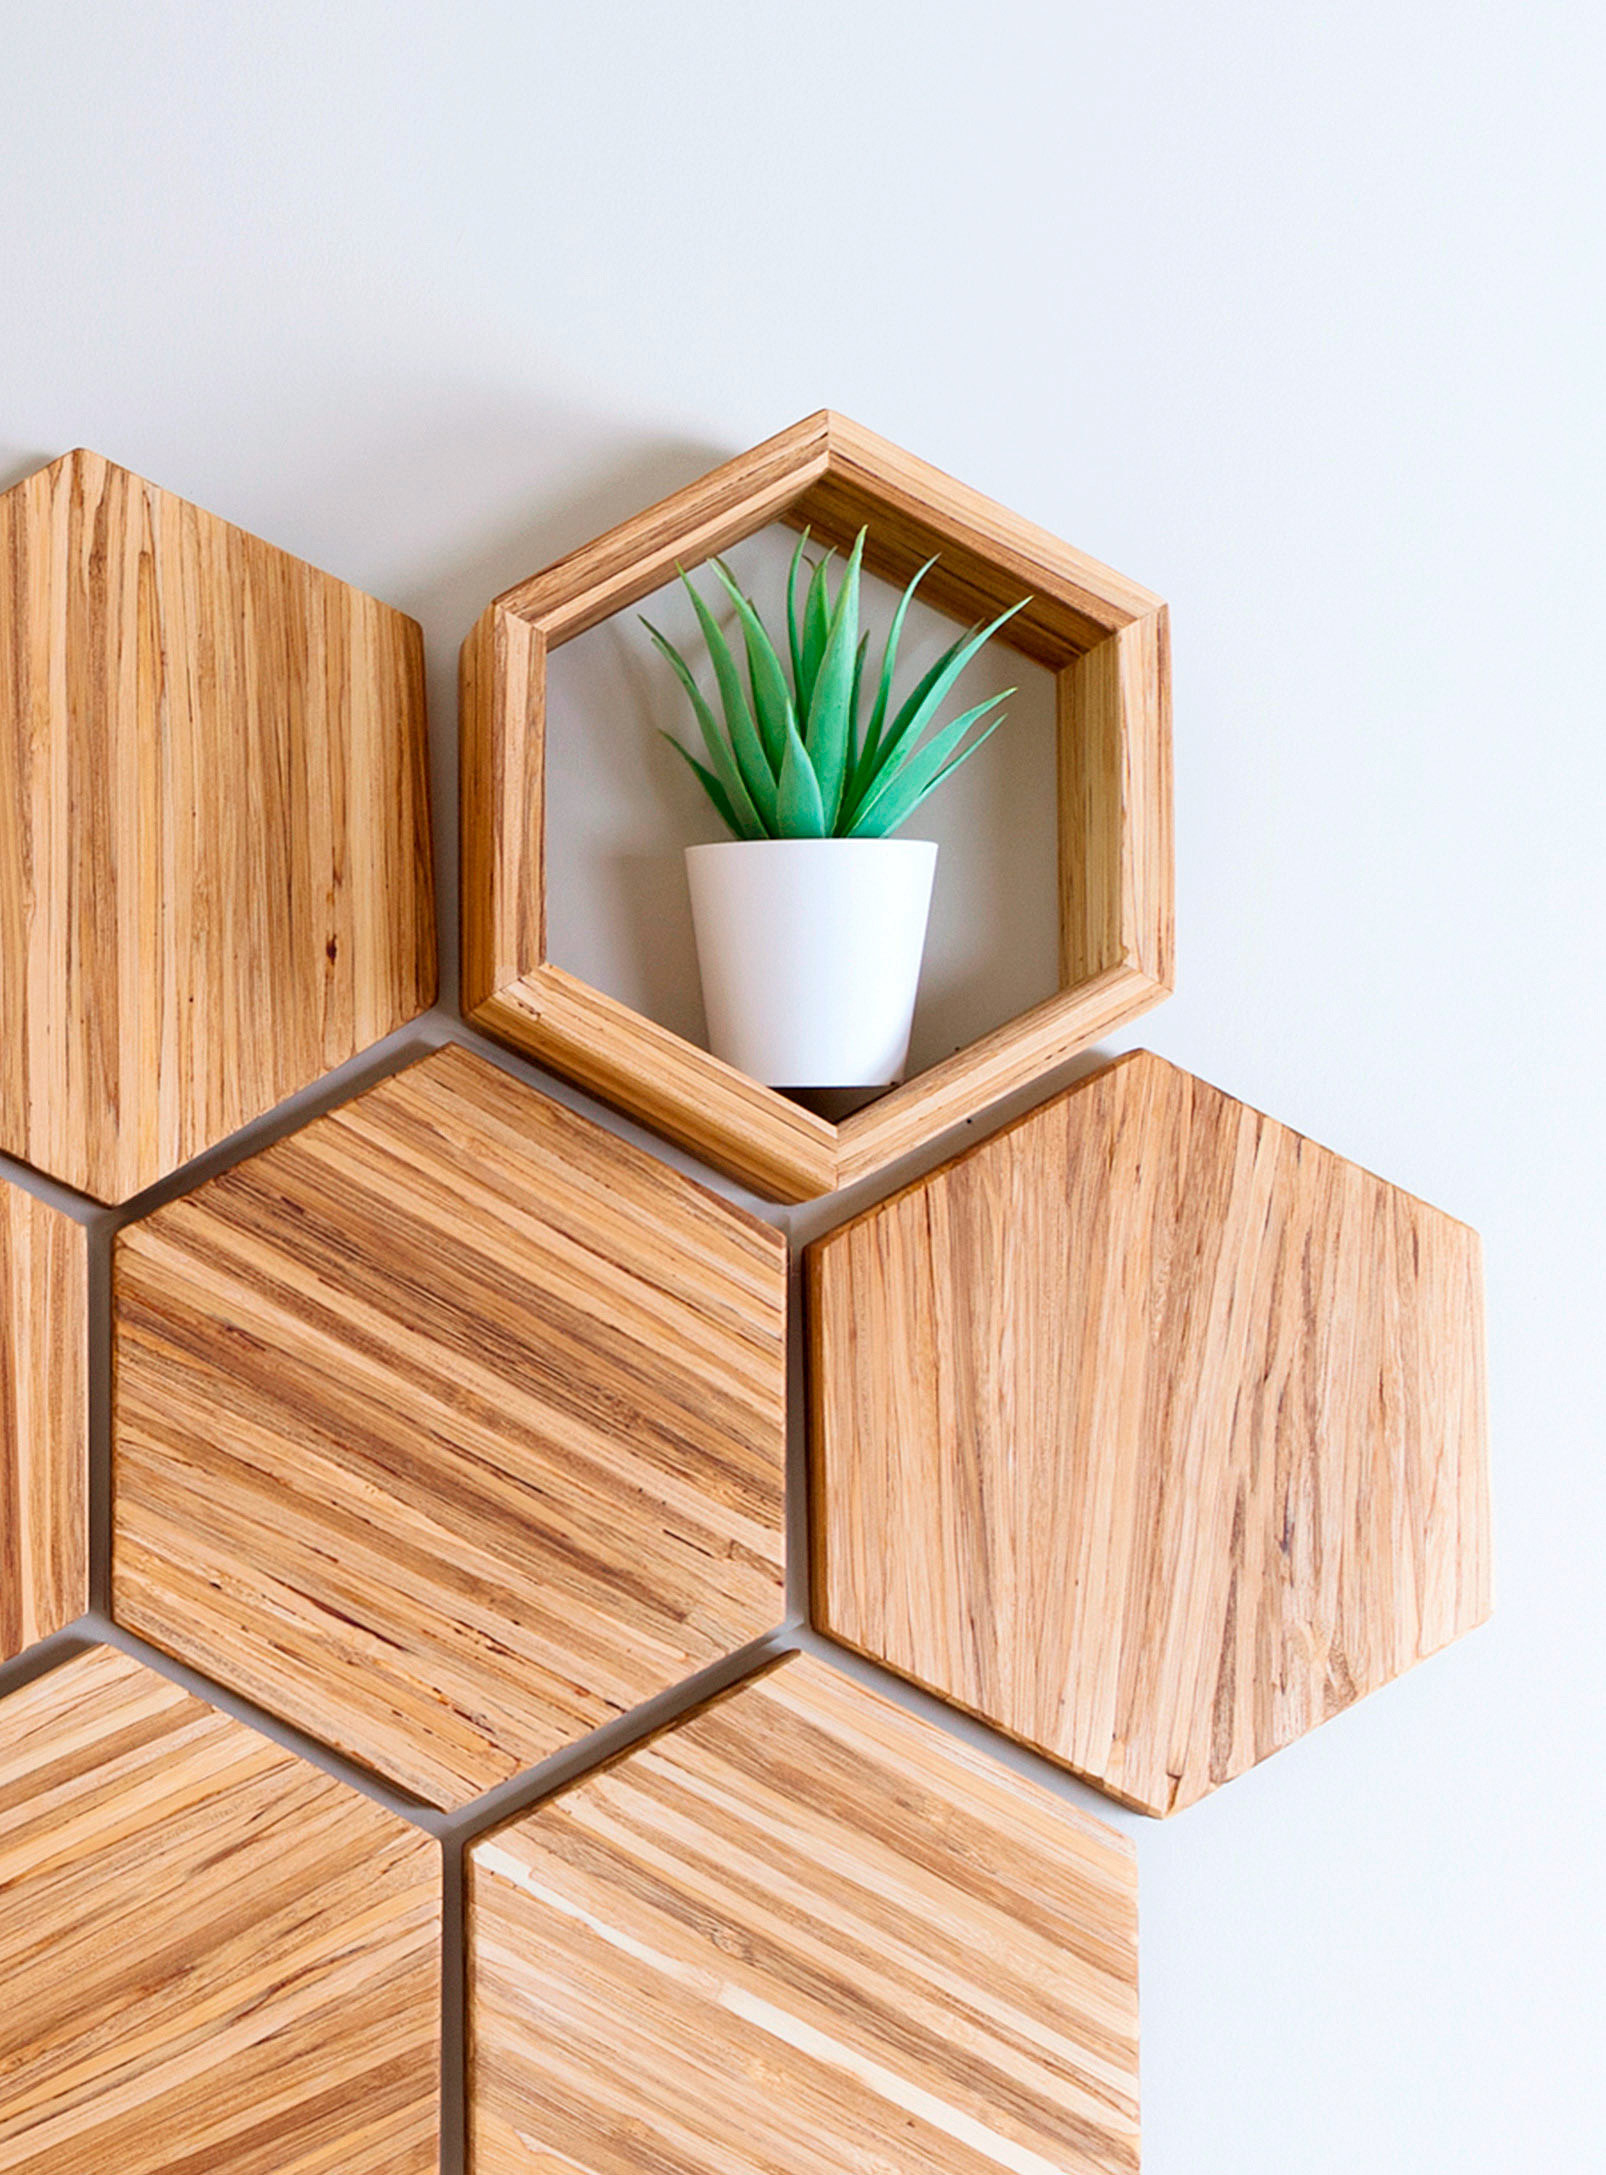 the shelf with a plant in it surrounded by the hexagon plates